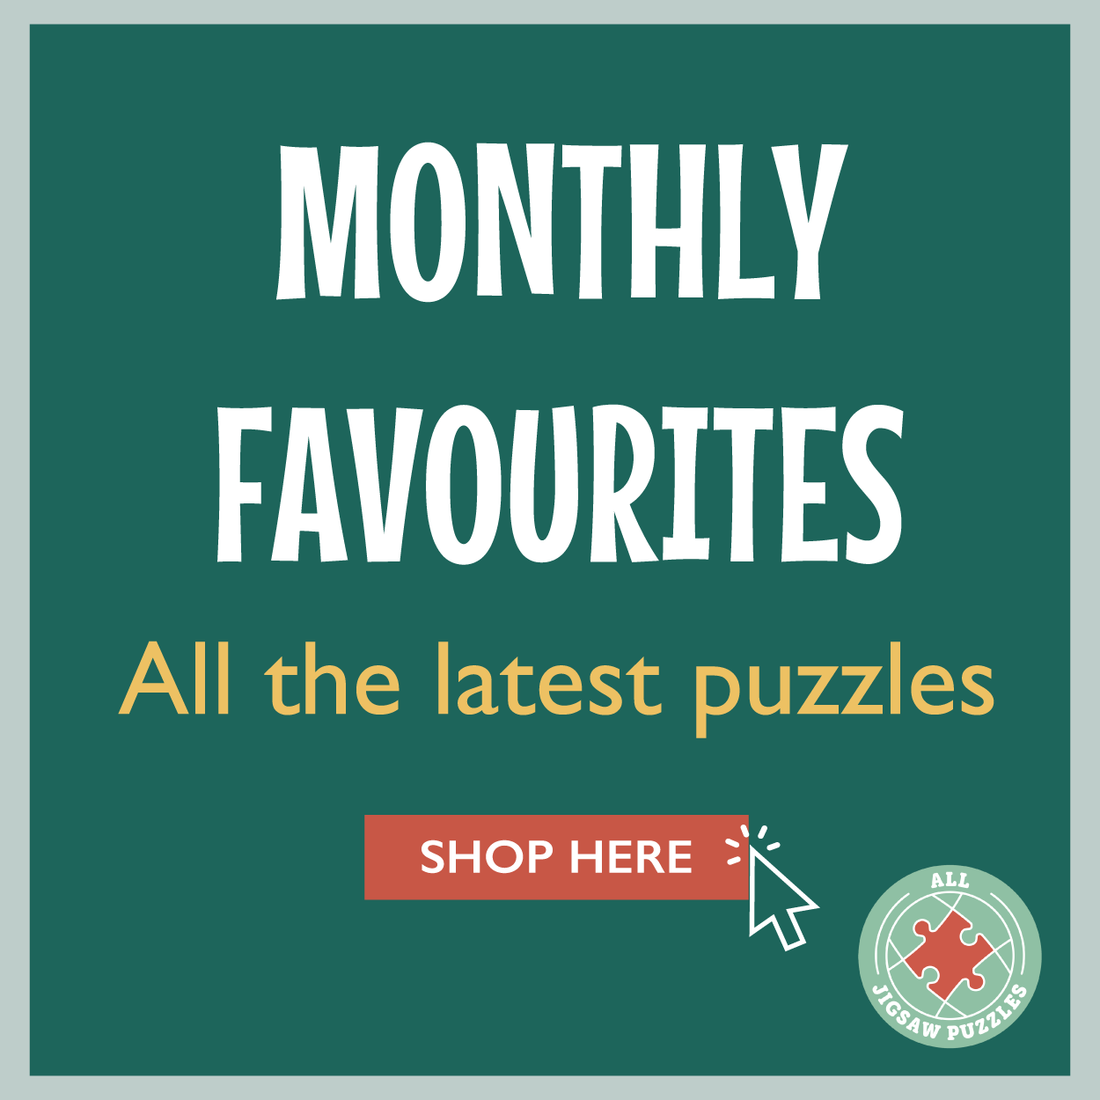 January's Monthly Favourite Jigsaw Puzzles!